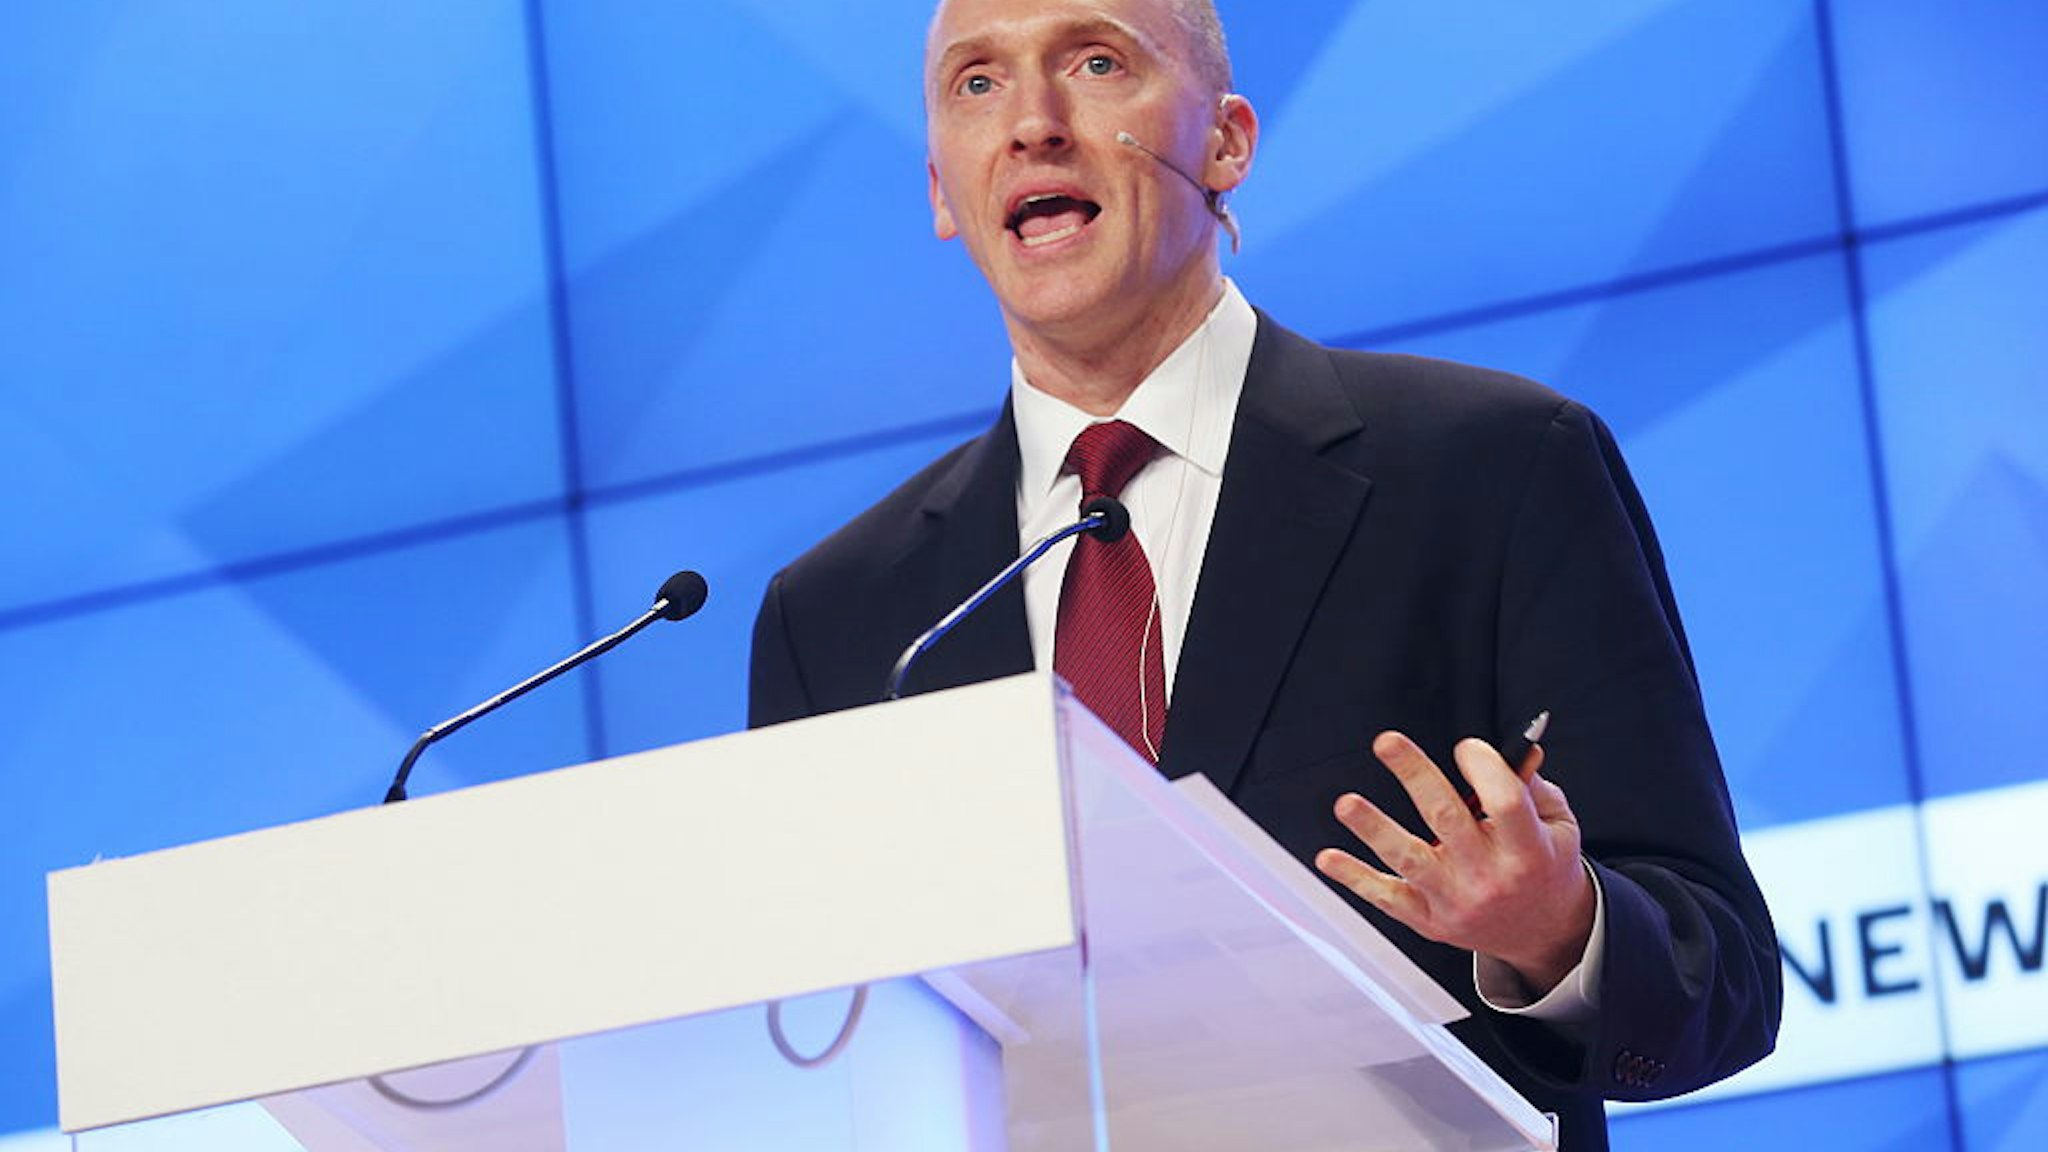 Carter Page, Global Energy Capital LLC Managing Partner and a former foreign policy adviser to U.S. President-Elect Donald Trump, makes a presentation titled " Departing from Hypocrisy: Potential Strategies in the Era of Global Economic Stagnation, Security Threats and Fake News" during his visit to Moscow.